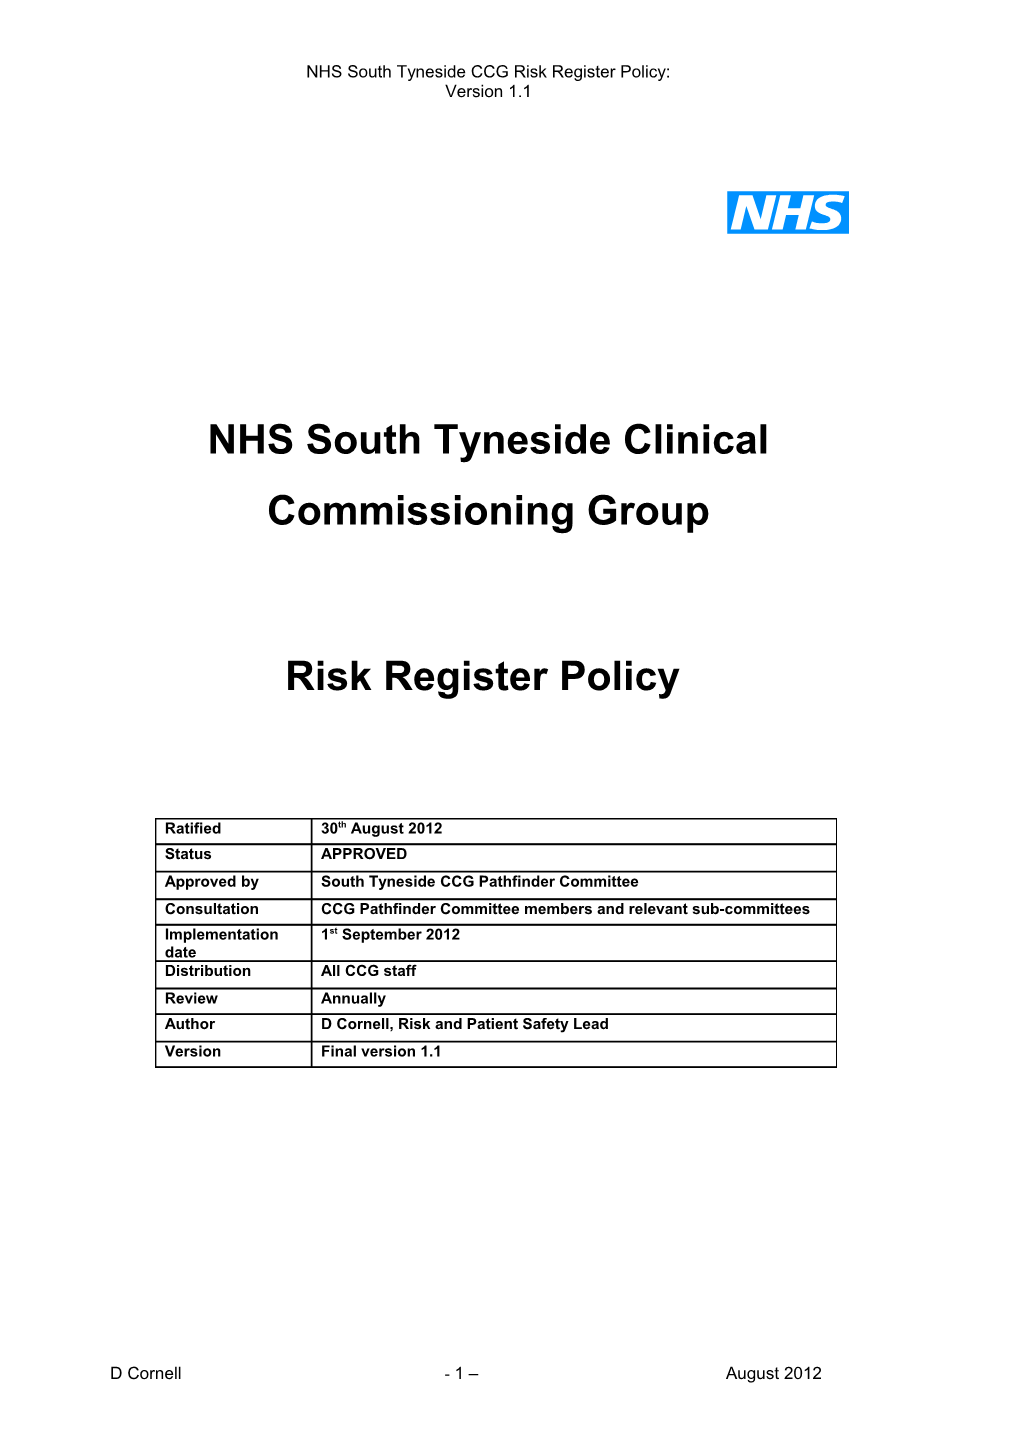 NHS South Tyneside CCG Risk Register Policy